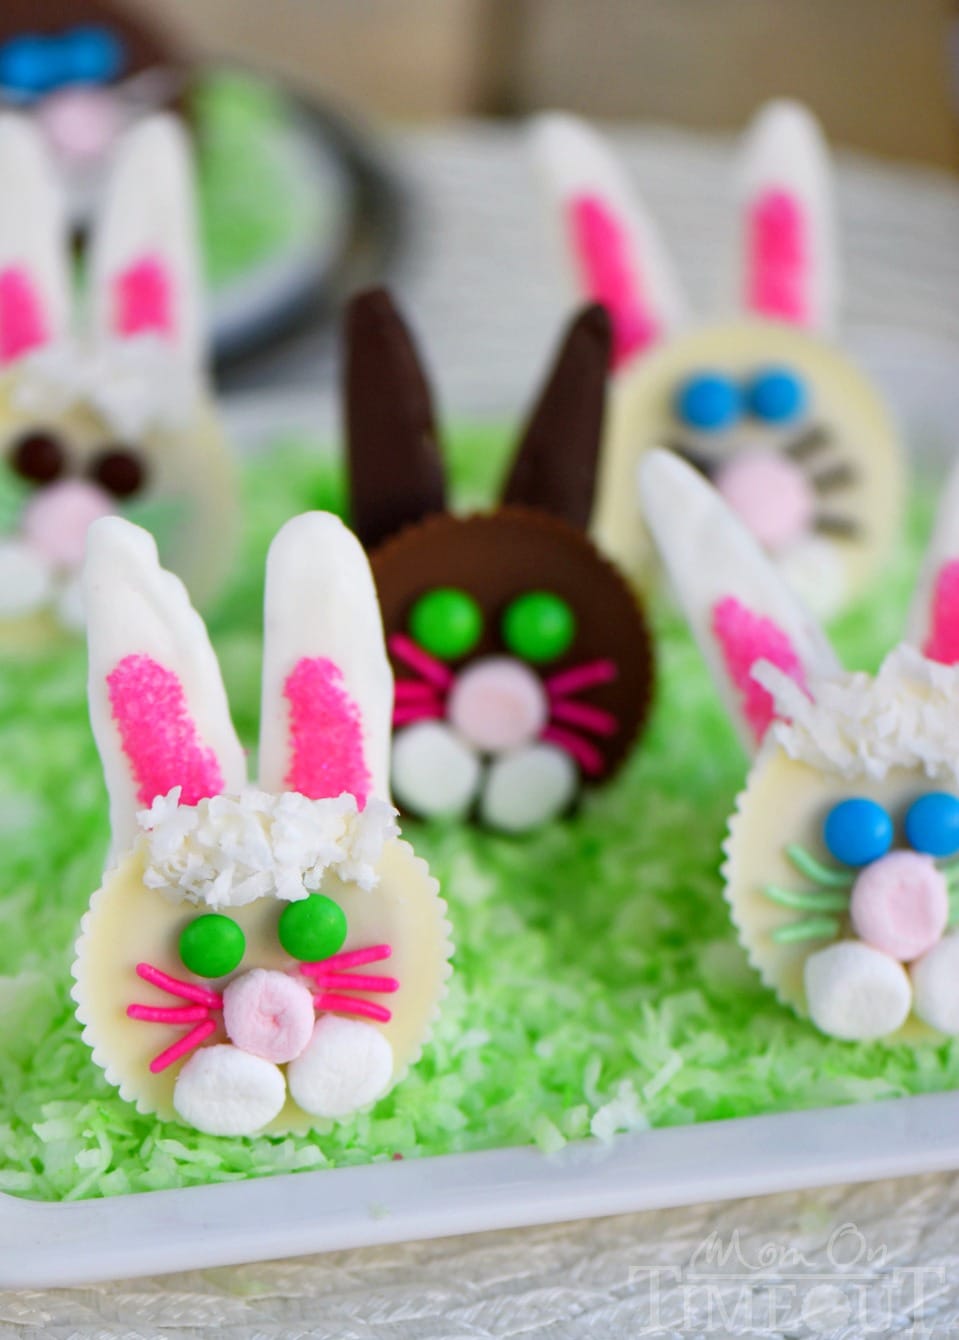 Nothing says Easter fun like these adorable Reese's Easter Bunnies! My two boys helped me make these tasty little treats and they are almost too cute to eat! 